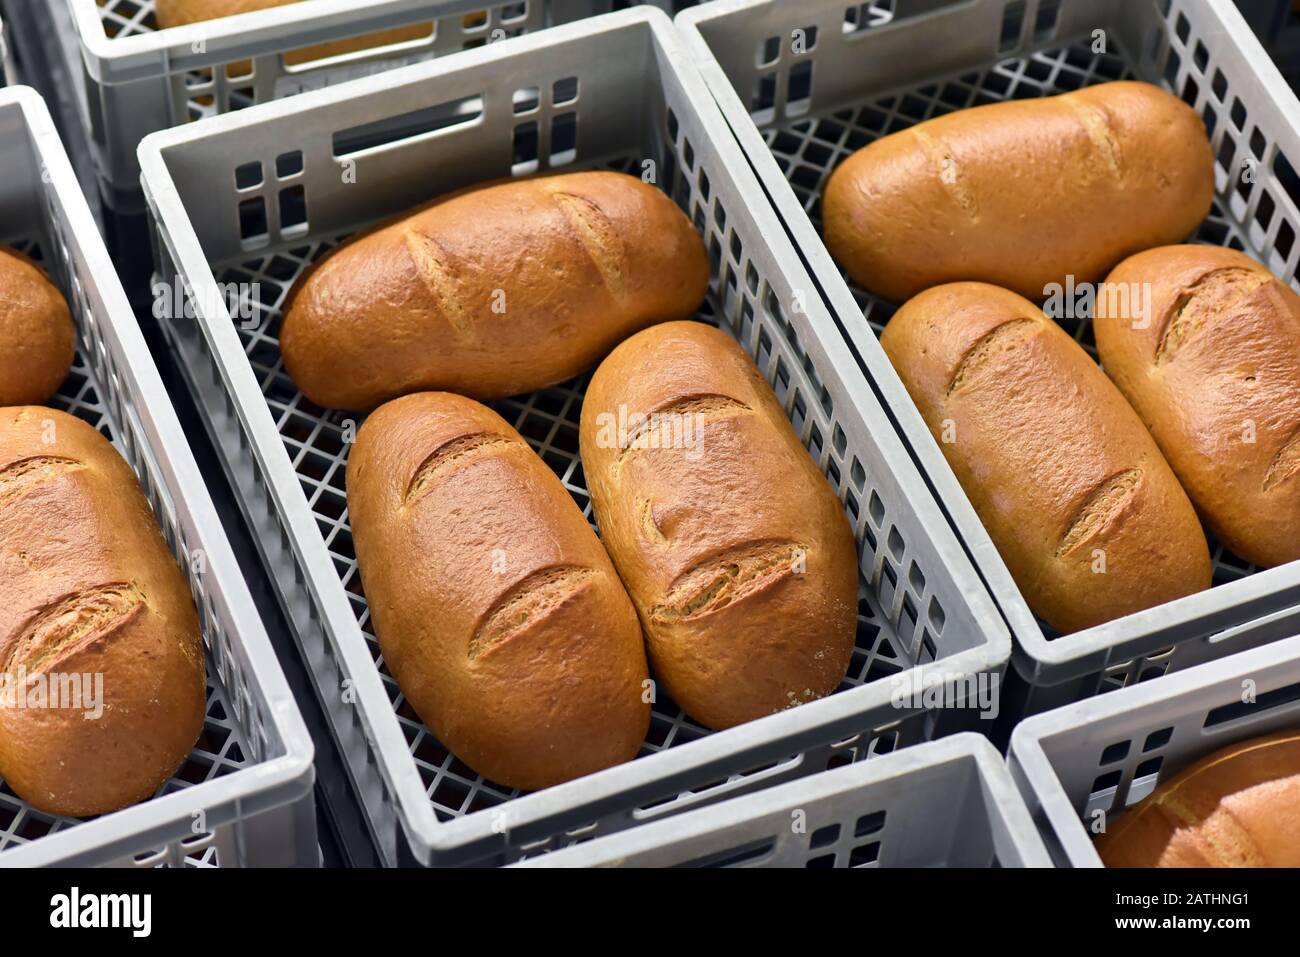 storage and transport of freshly baked loaves of bread in a bakery for sale - industrial food production Stock Photo